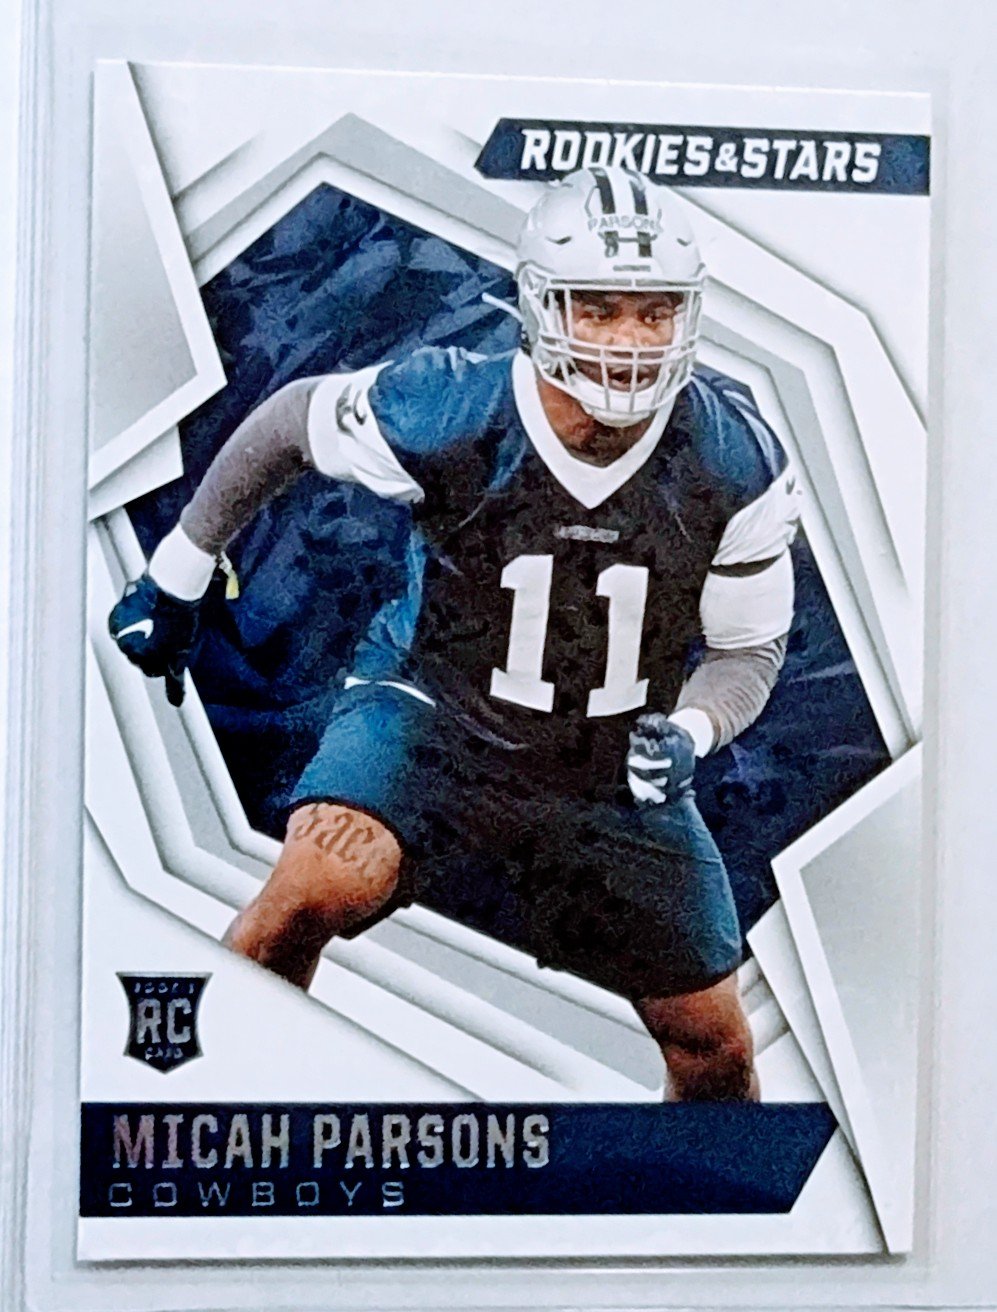 2021 Panini Rookies and Stars Micah Parsons Rookie Football Card AVM1 simple Xclusive Collectibles   